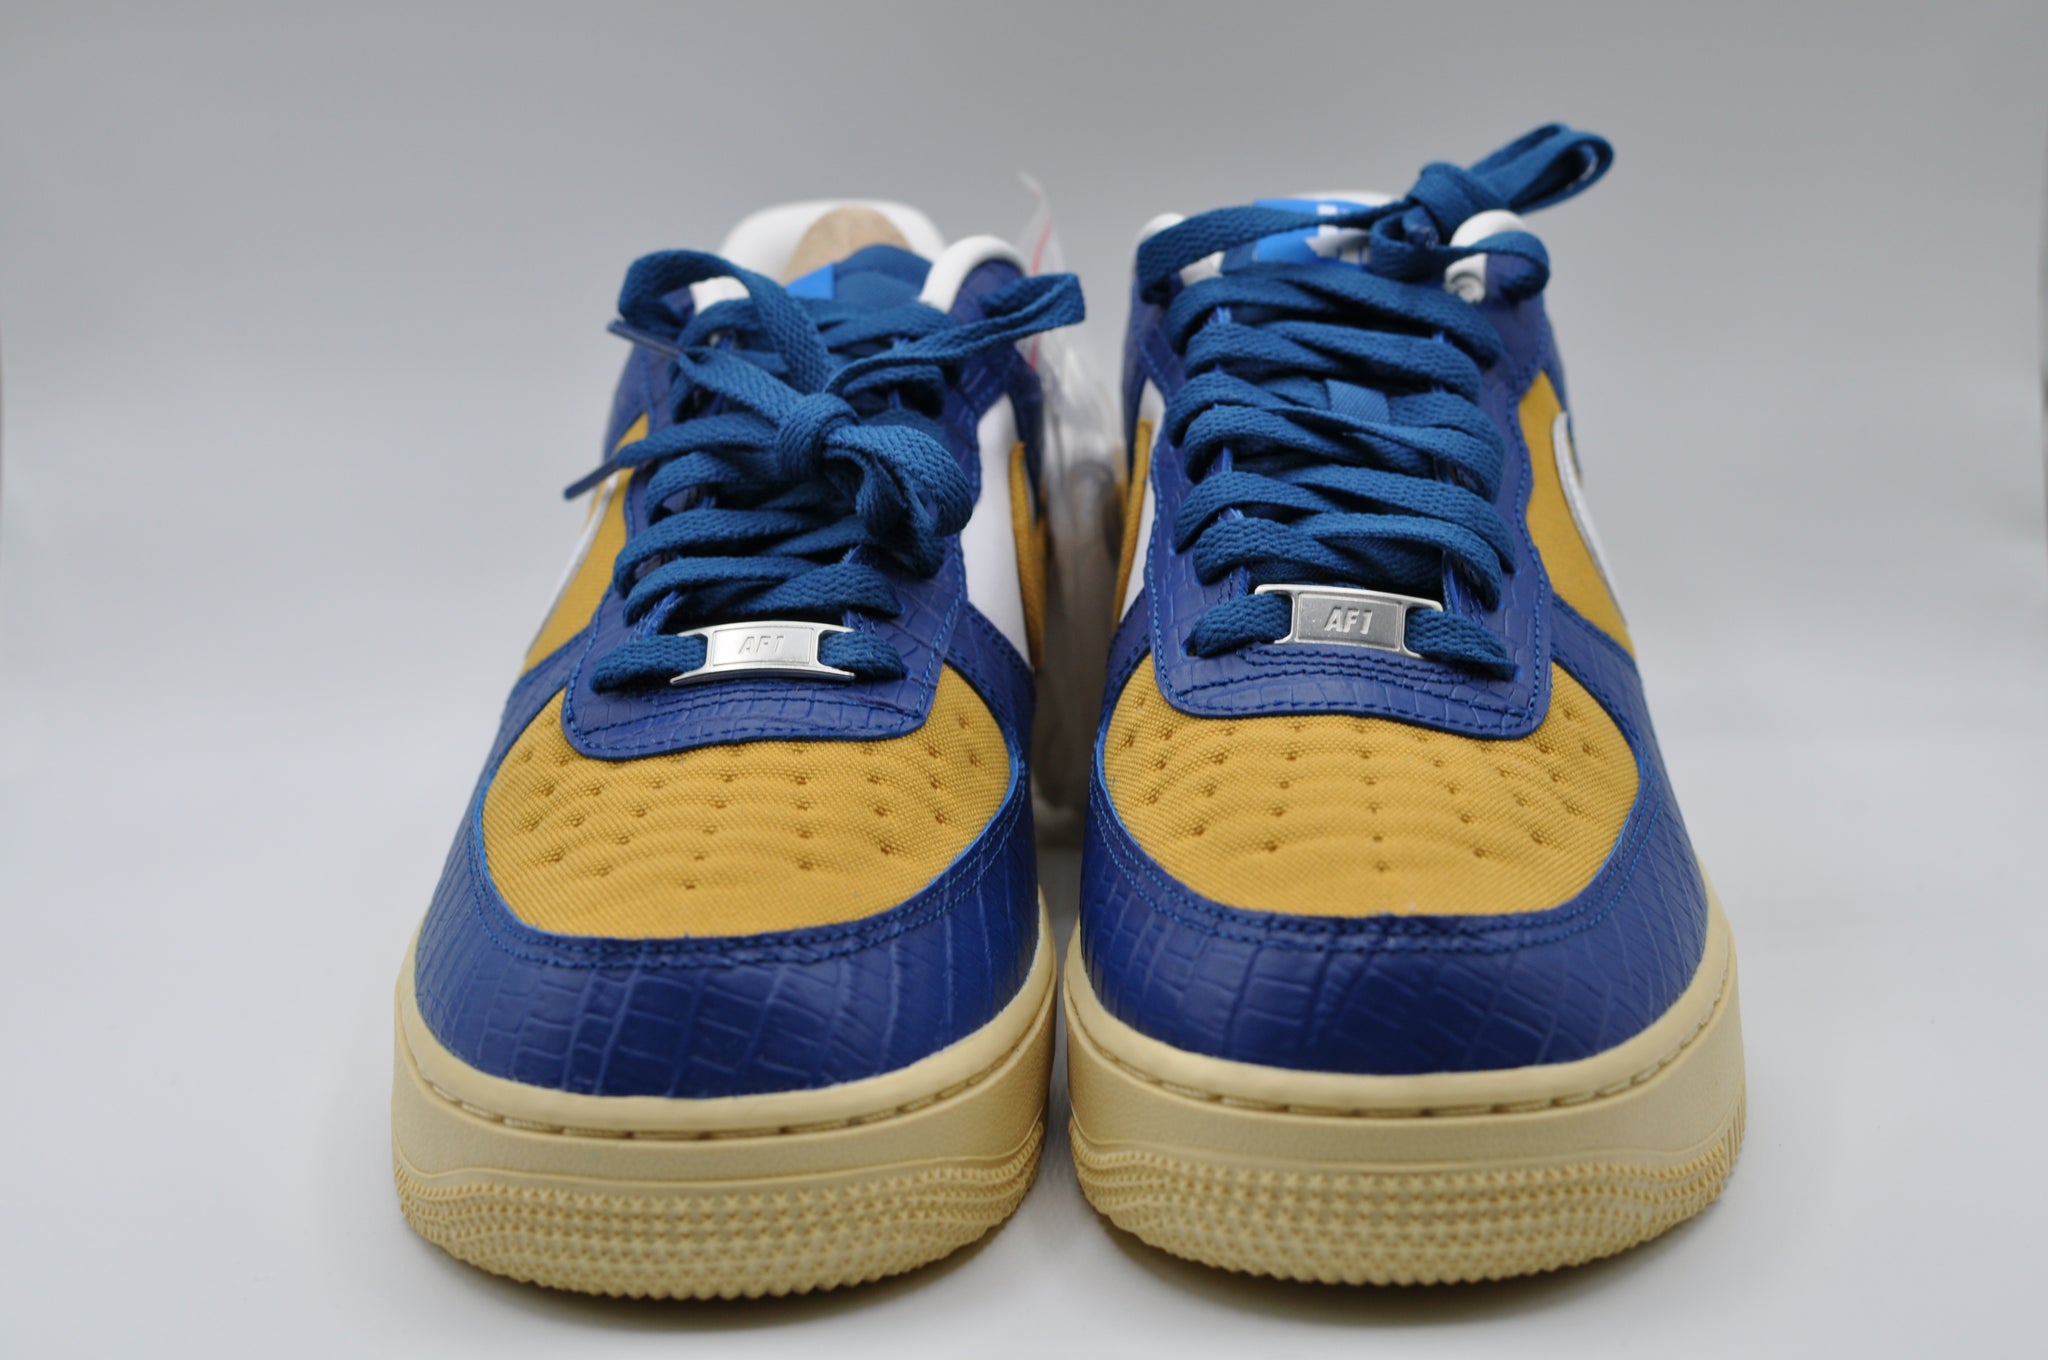 Nike Air Force 1 Low SP Undefeated 5 on It Blue Yellow Croc